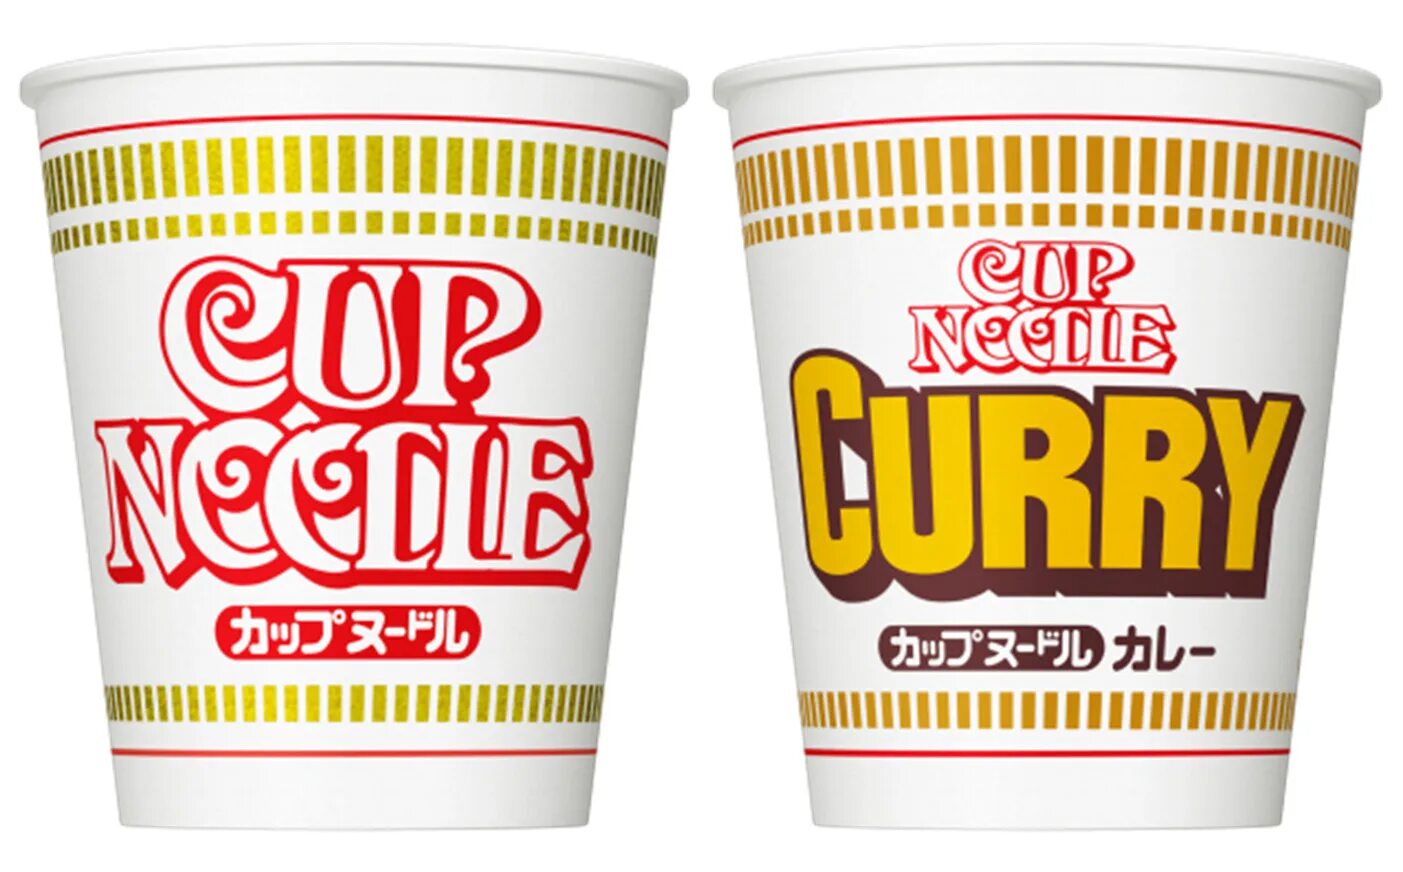 Cup лапша. Nissin Cup. Nissin Cup Noodles. Cup Ramen из 90-х лапша. Лапша Cup Noodle.